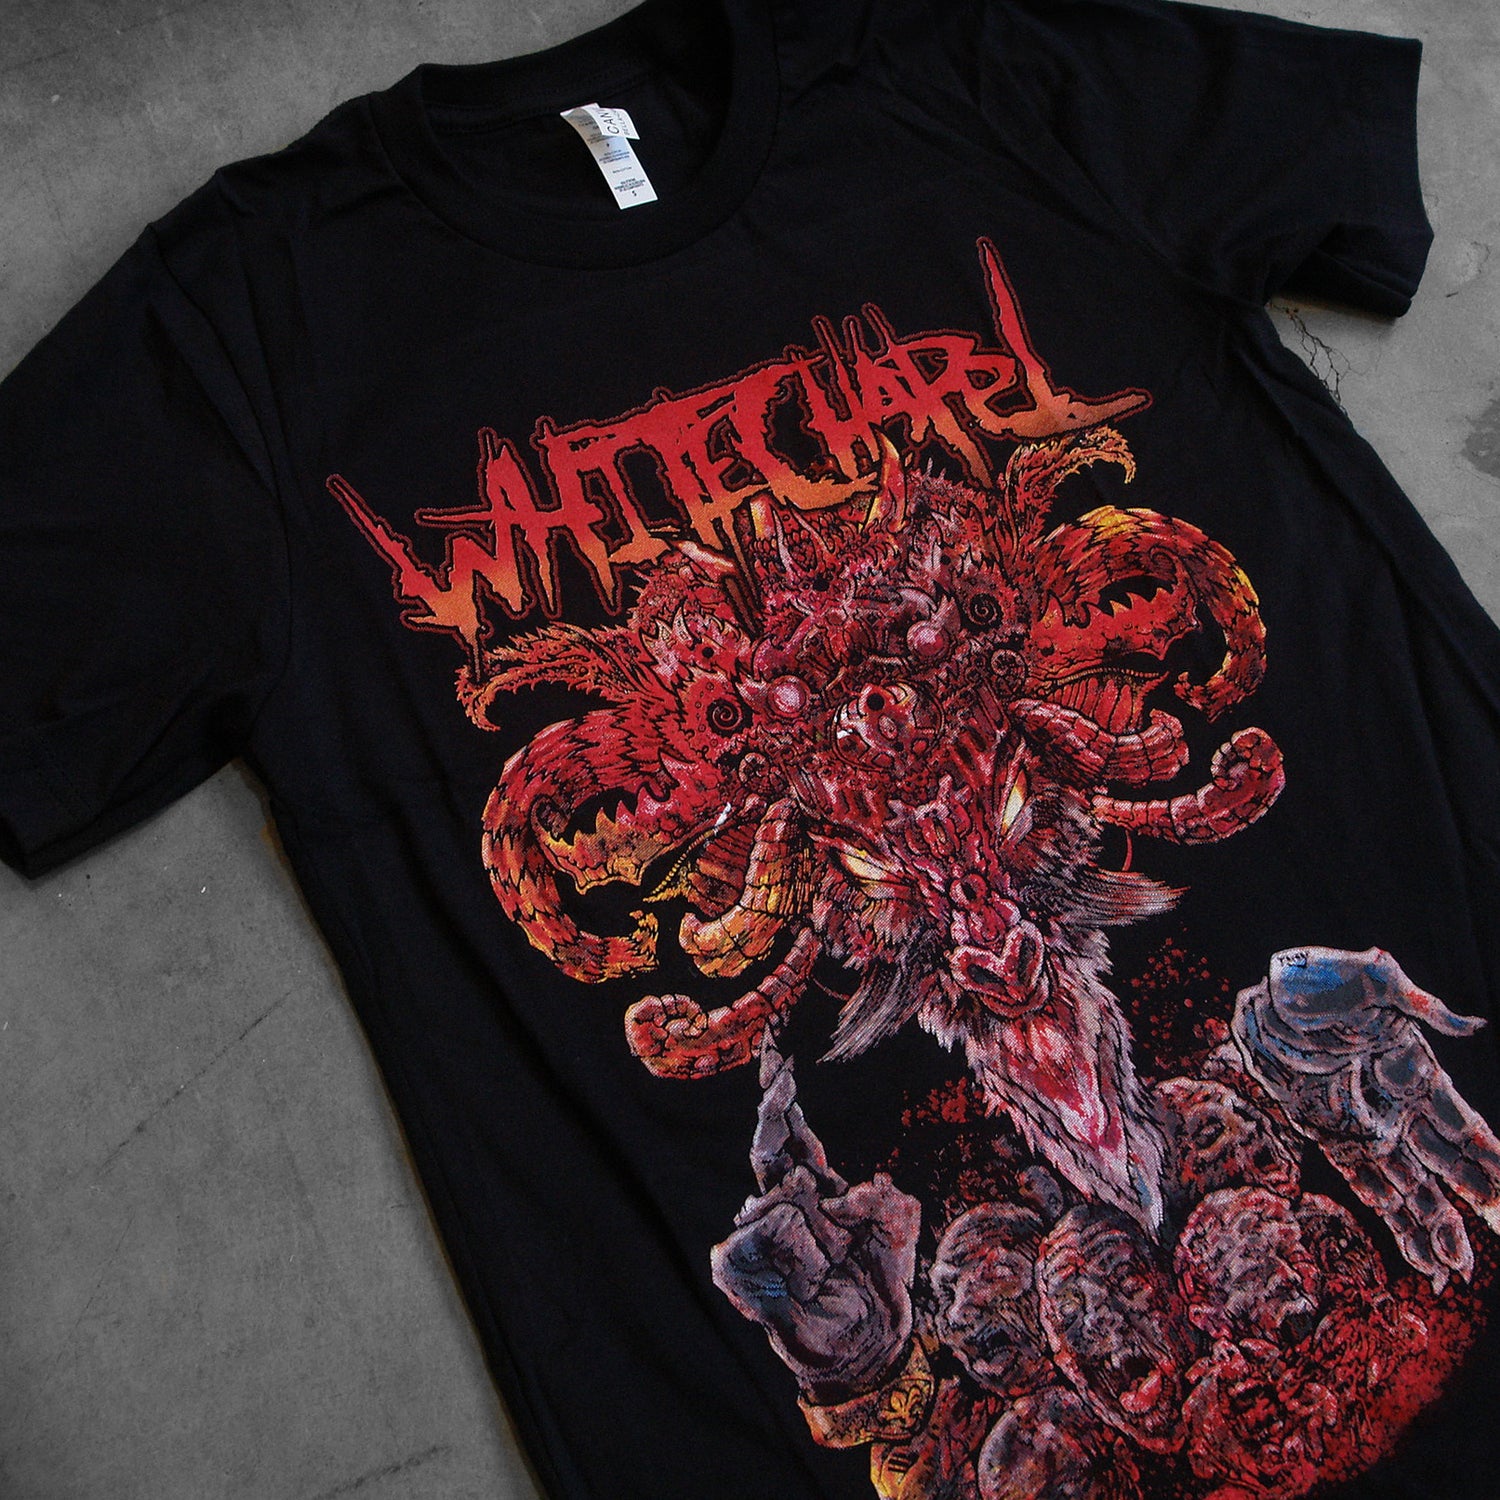 image of a black tee shirt. tee has full color body print of a demon medusa like head. at the top says whitechapel